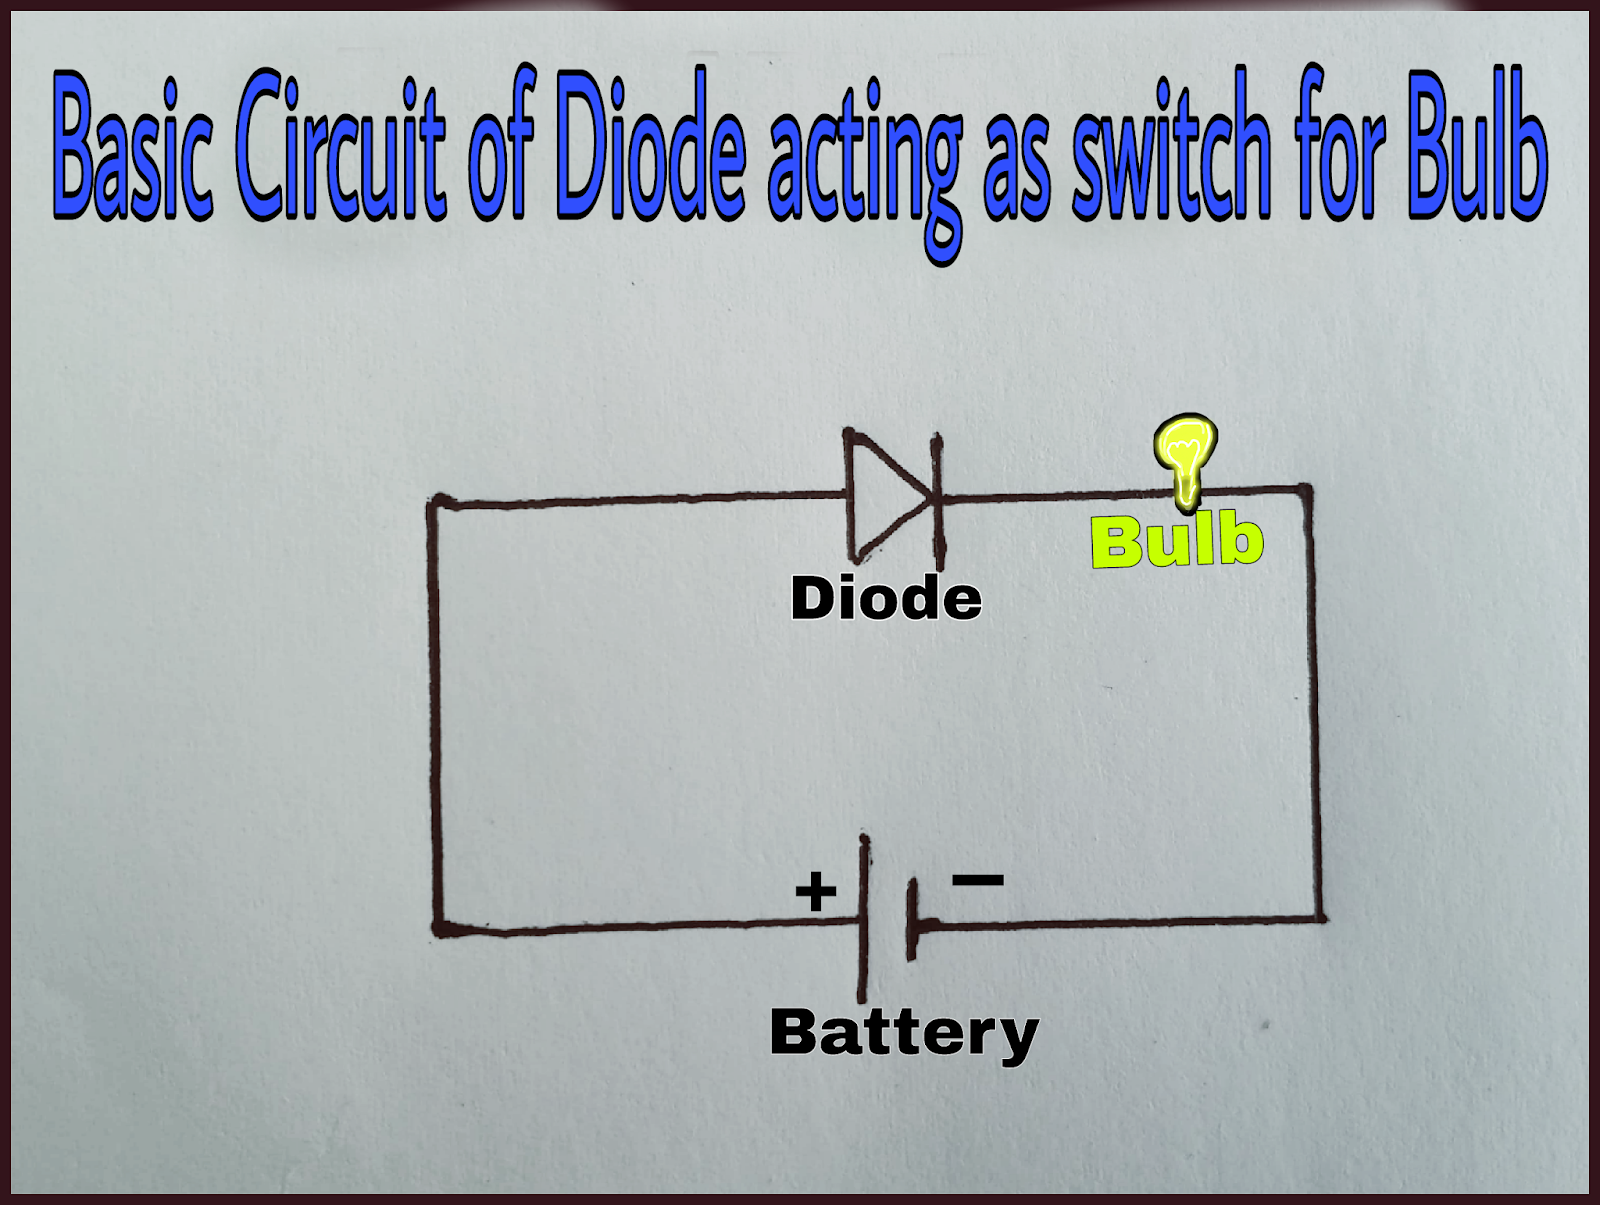 Working of diode as a switch in electronic circuits.